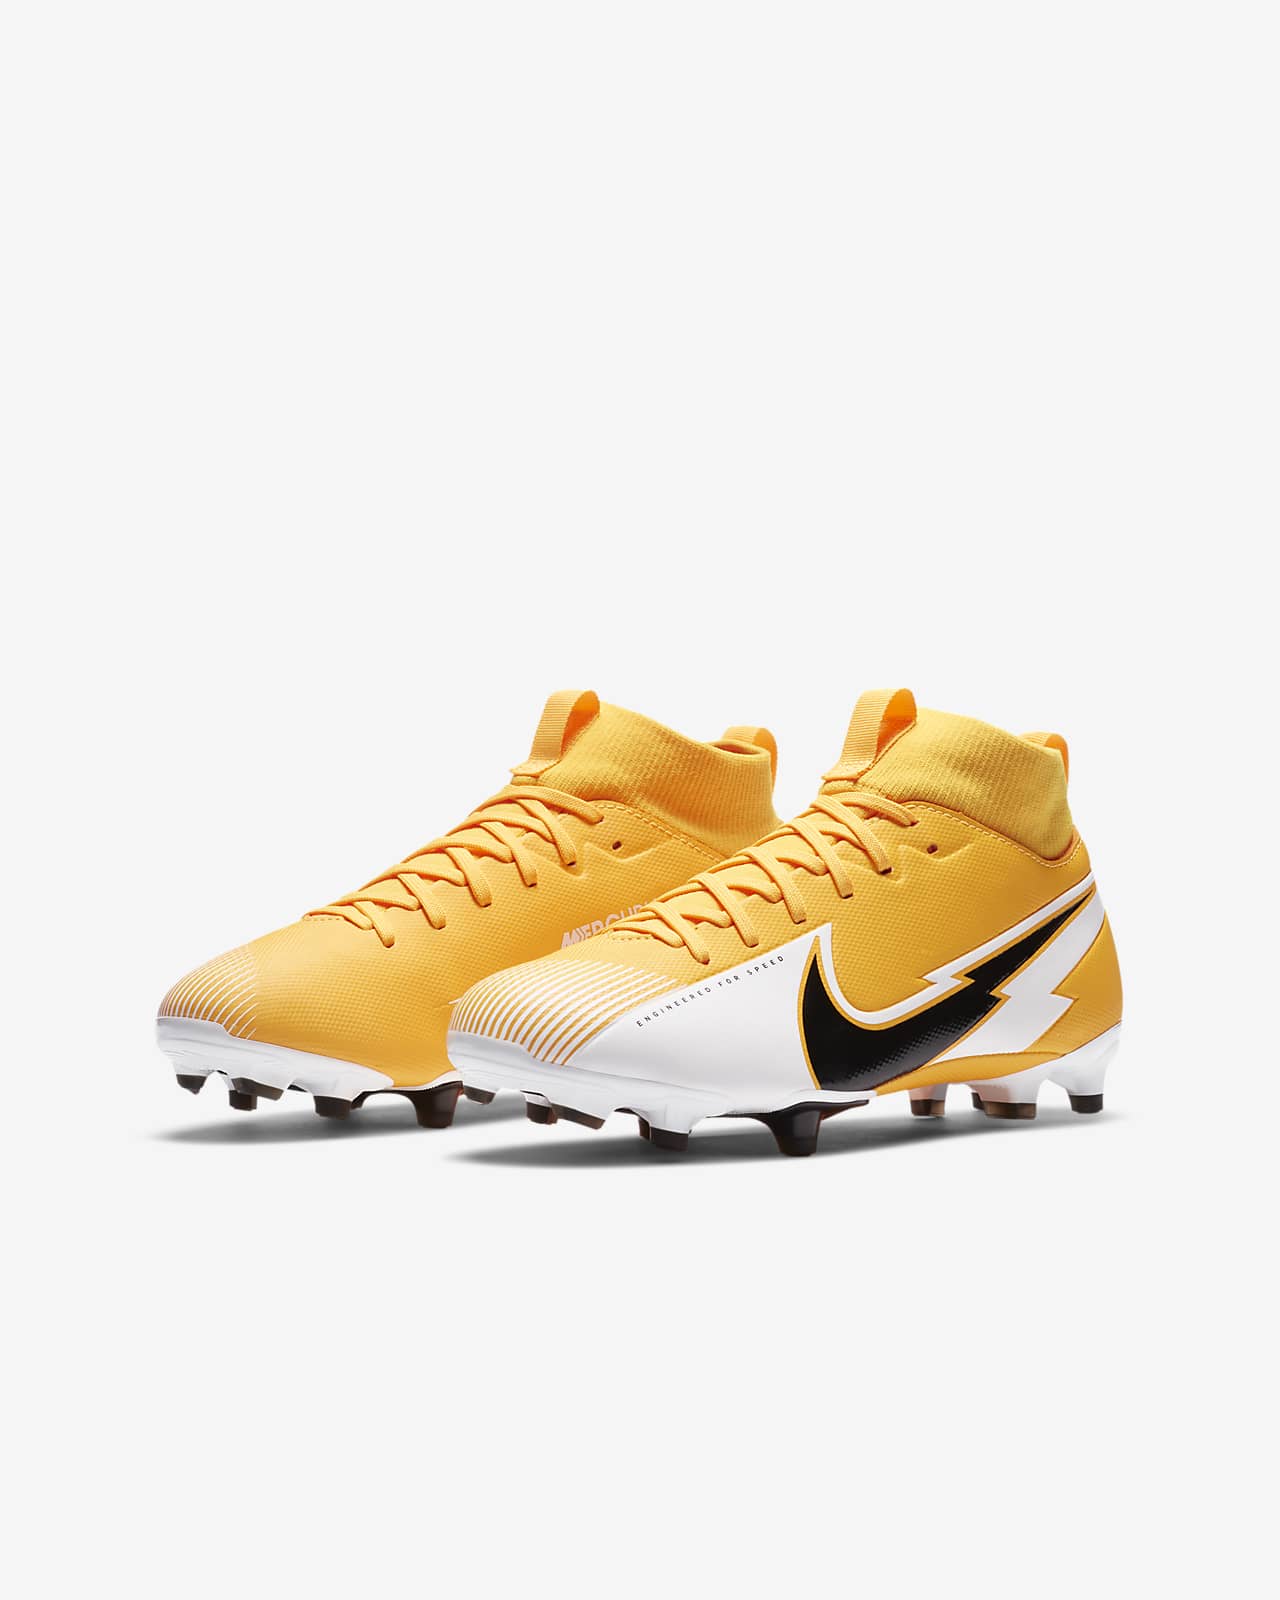 nike mercurial superfly 7 academy fg soccer cleats